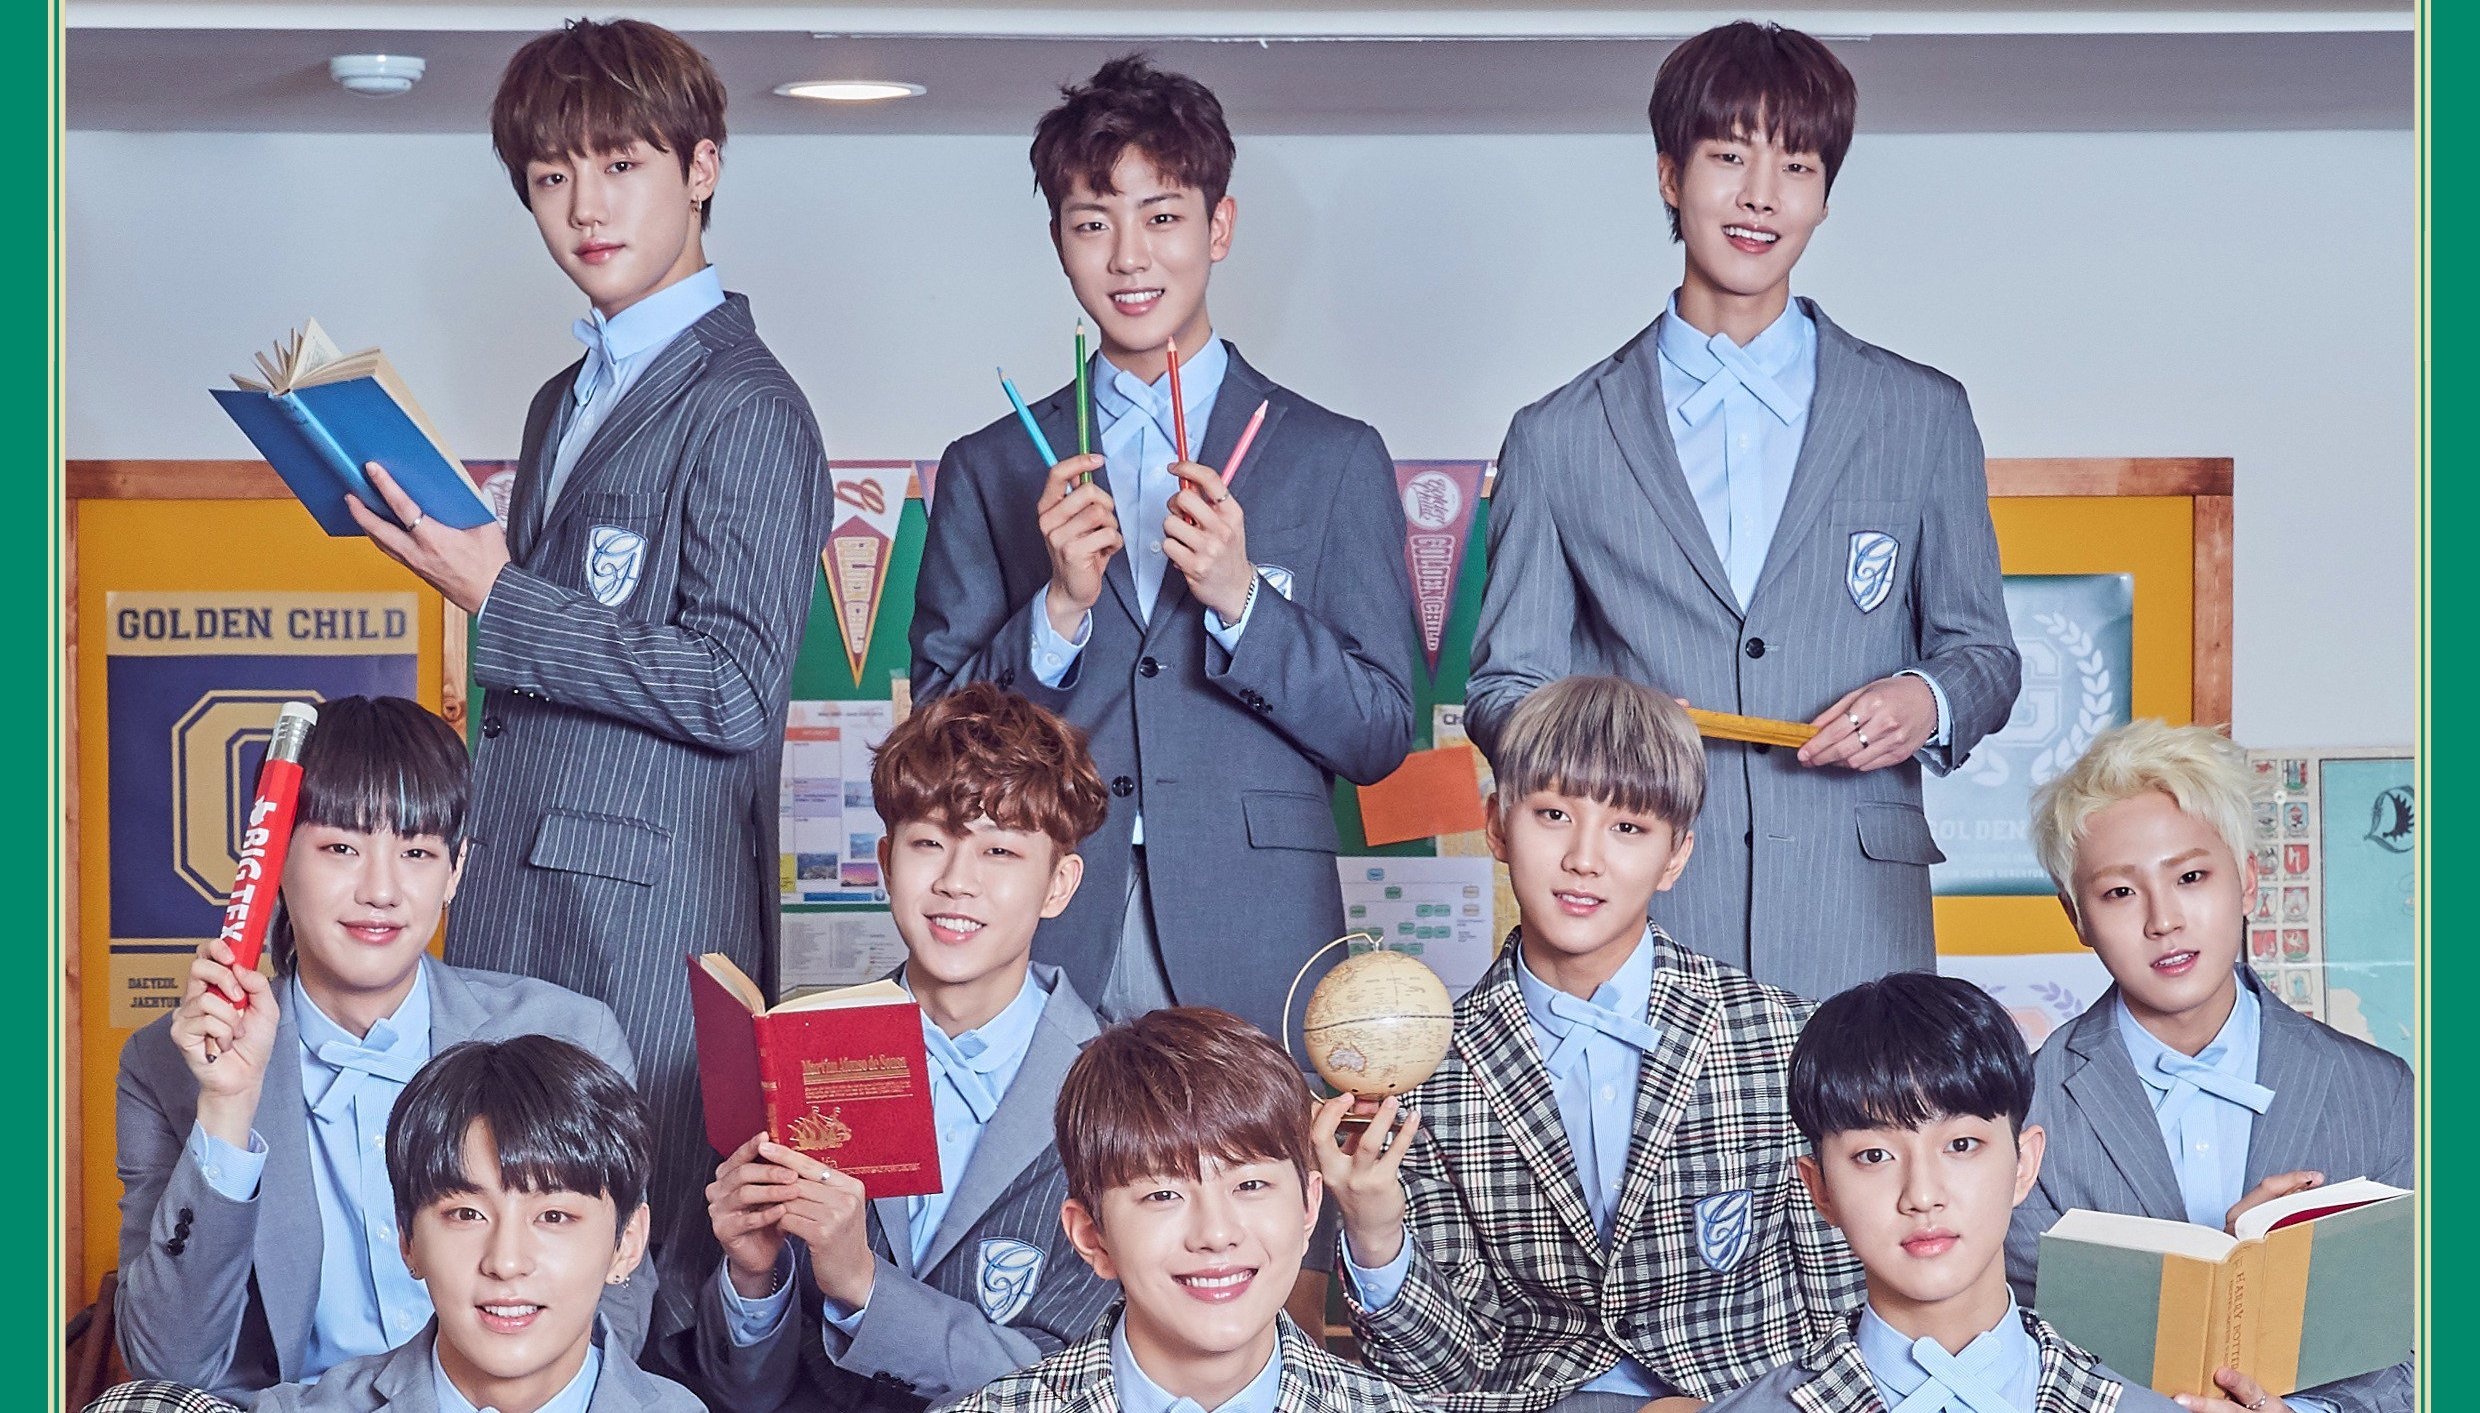 Golden Child band, Profile facts, Discography, Channel K, 2480x1420 HD Desktop